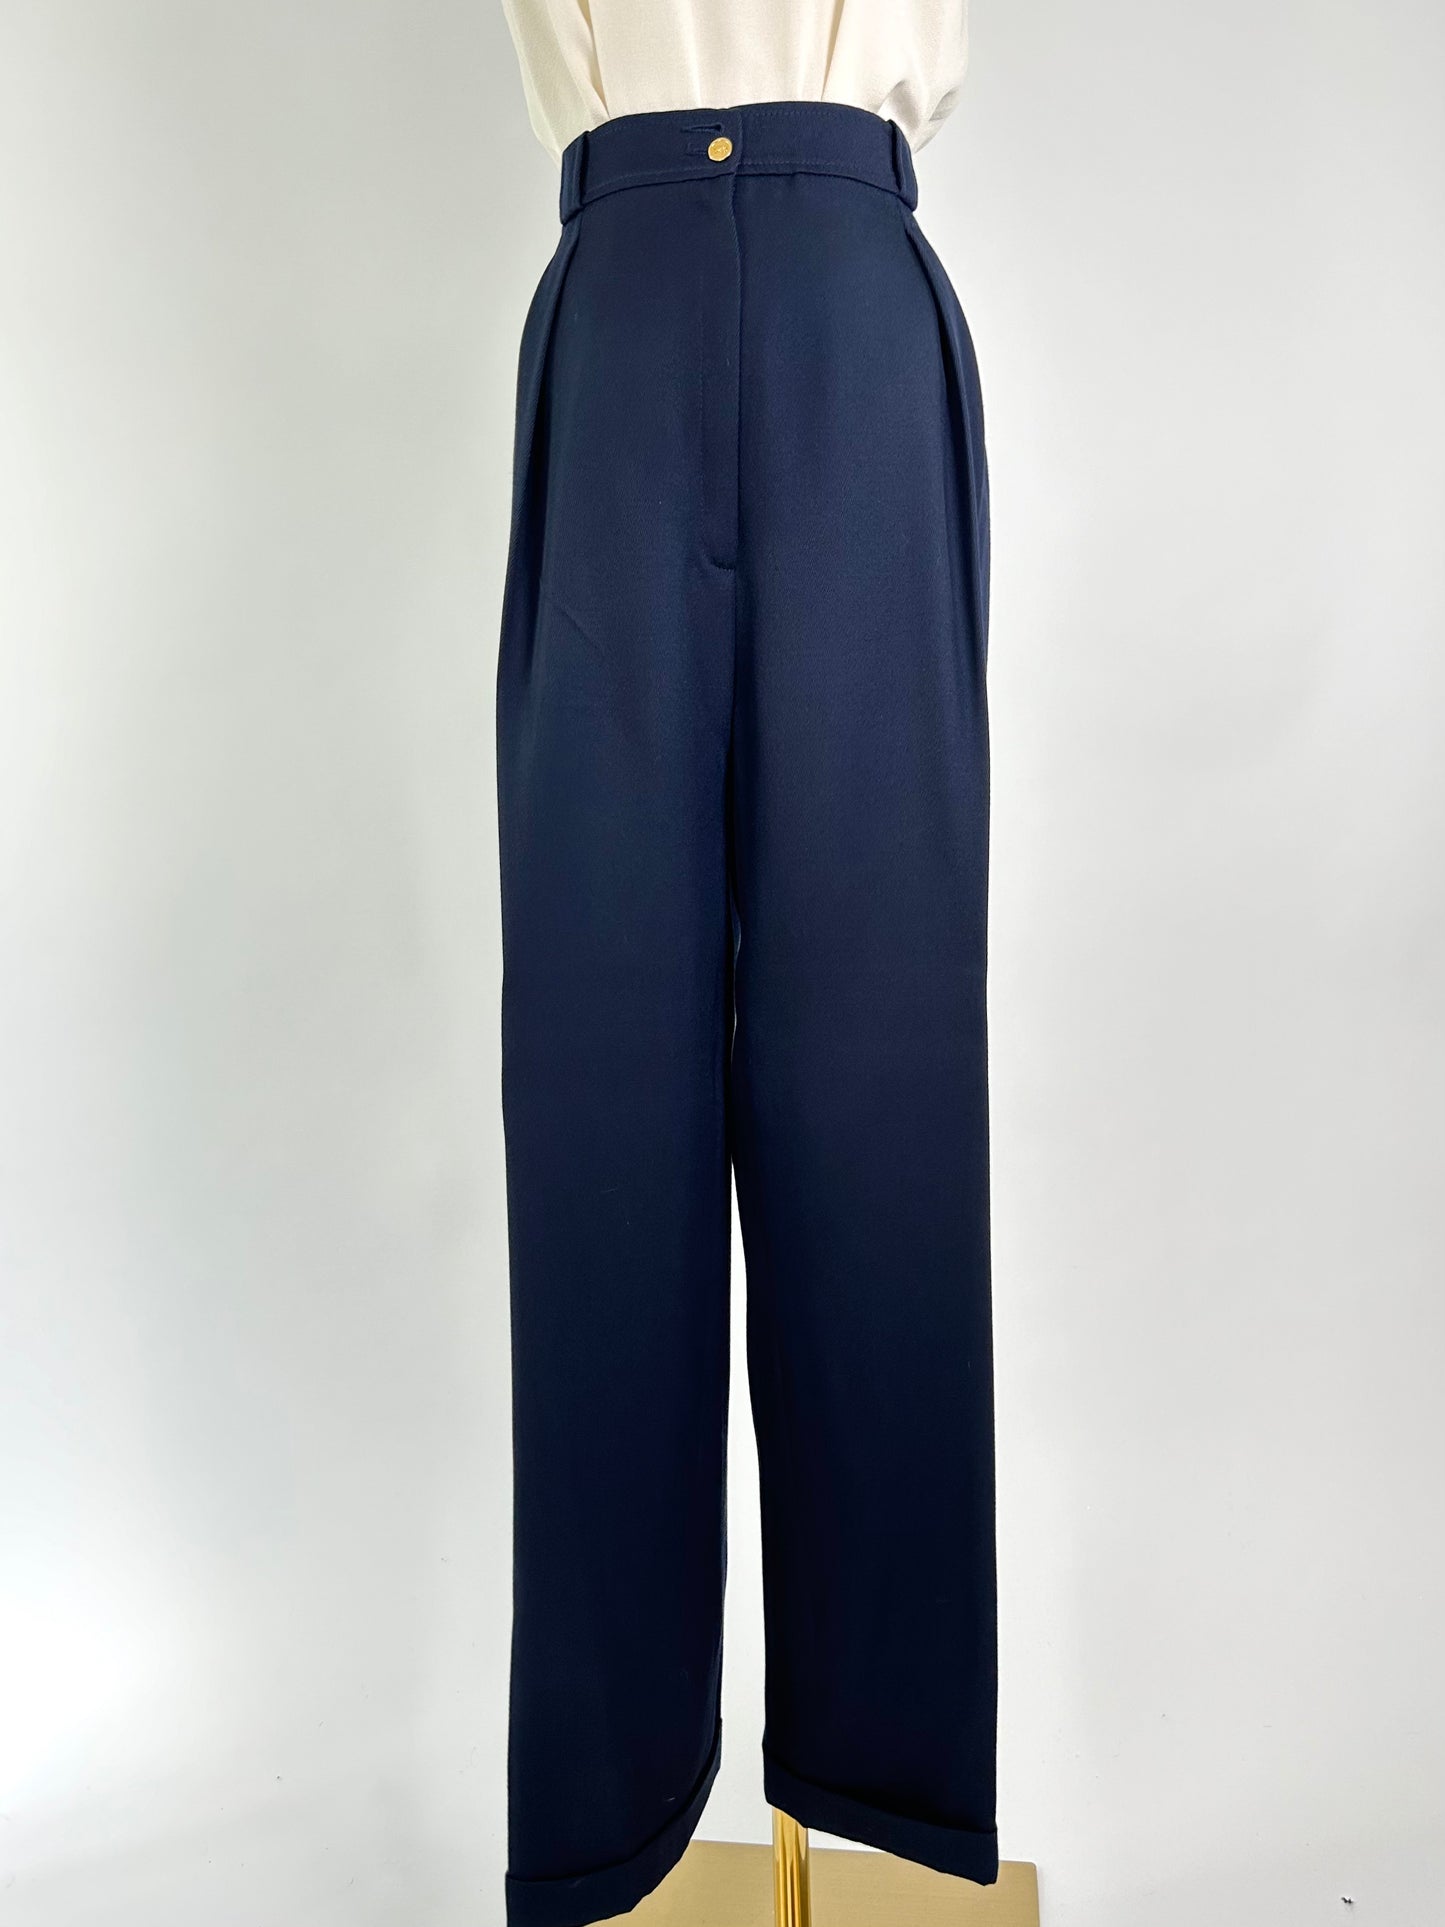 Vintage Chanel Navy Trouser